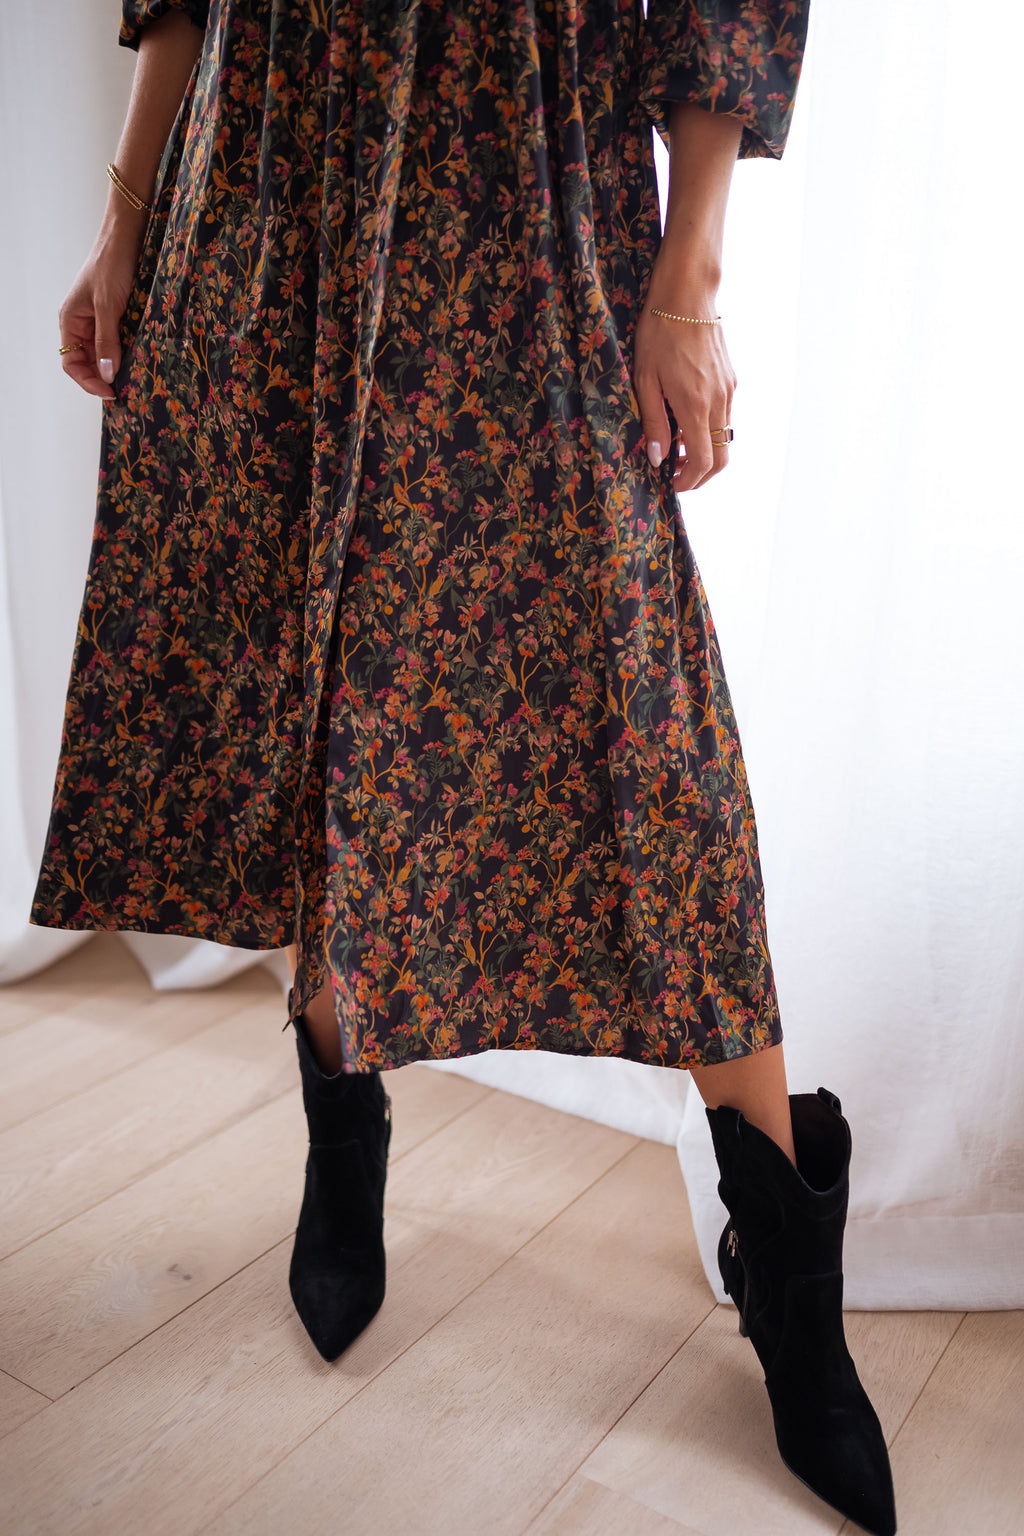 Norah dress - with flowers